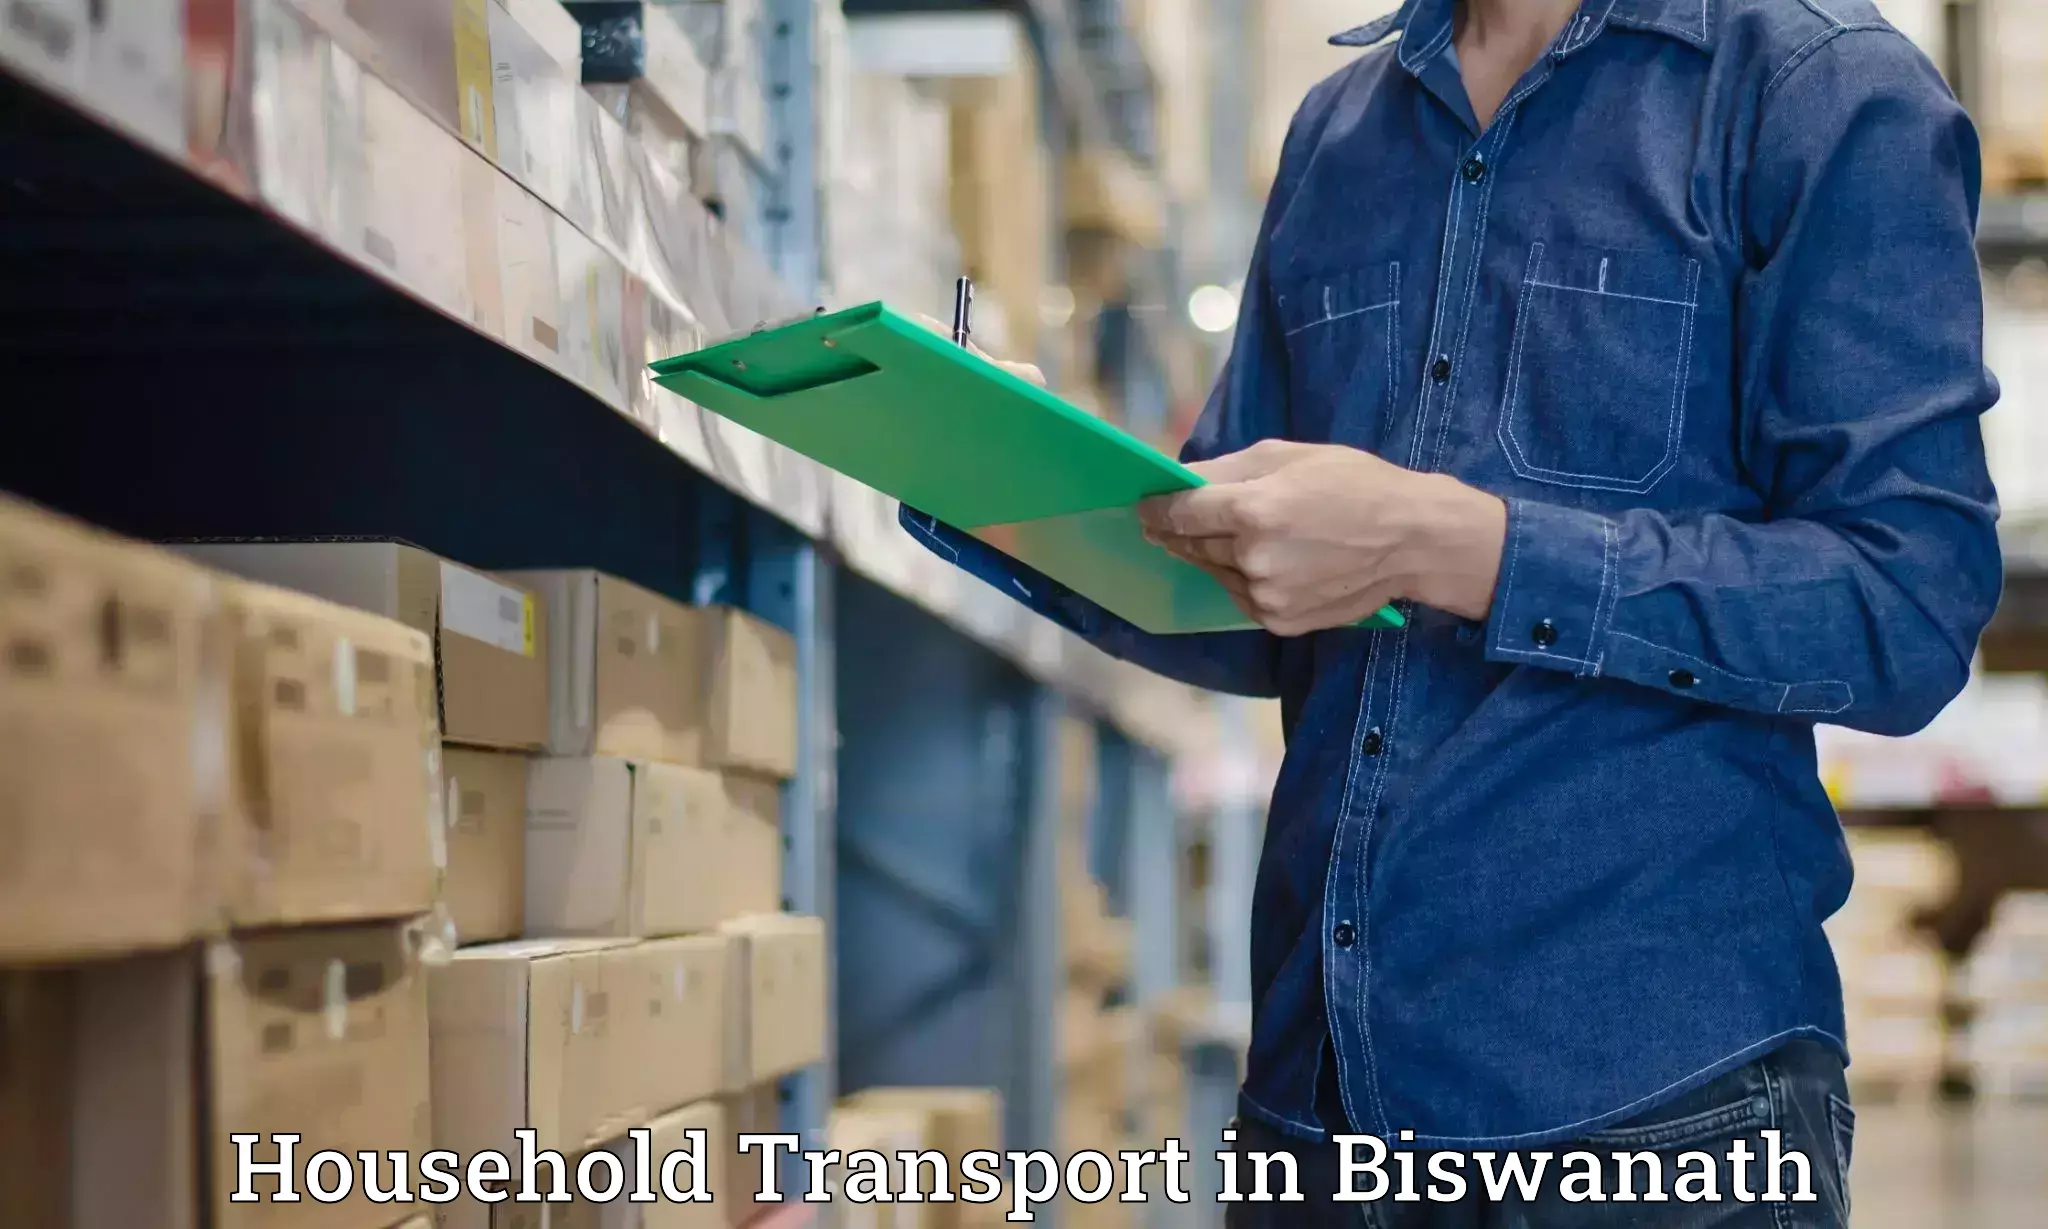 Furniture transport and logistics in Biswanath